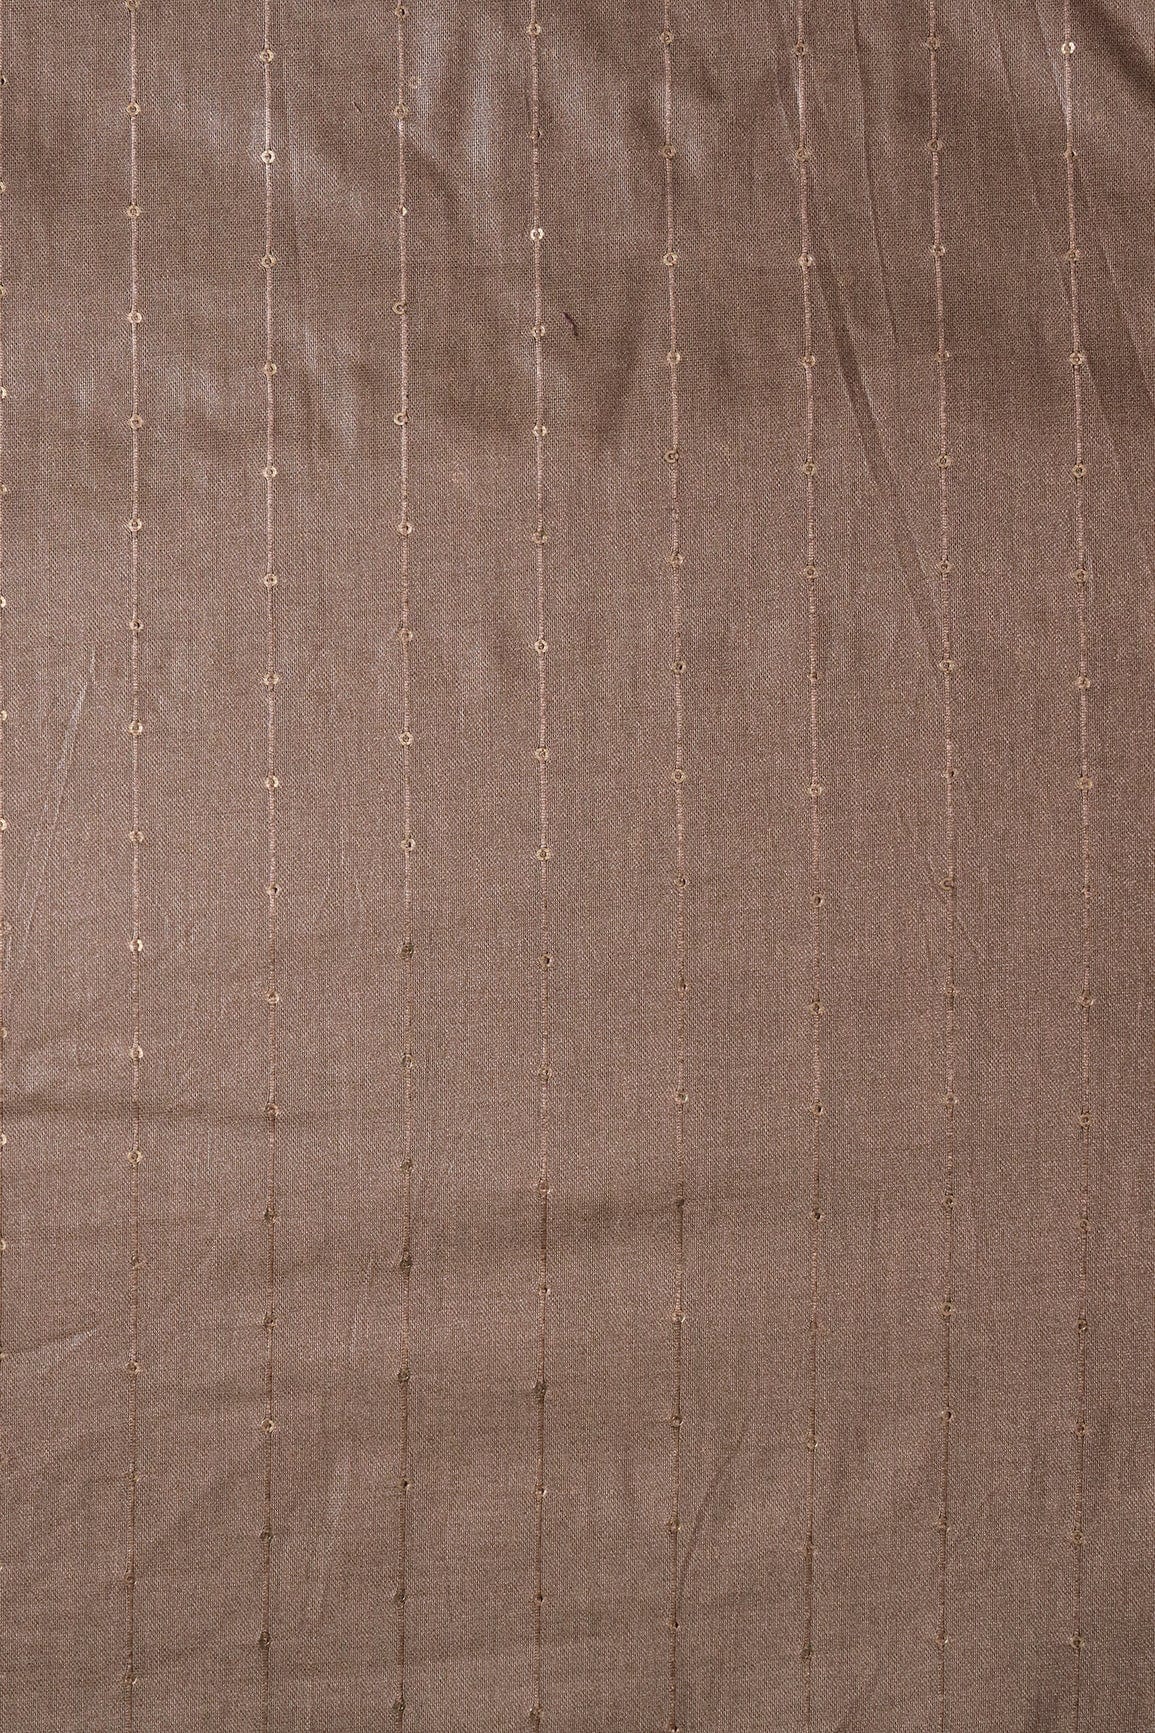 Beautiful Coco Brown Thread With Gold Sequins Stripes Embroidery On Coco Brown Viscose Chanderi Silk Fabric - doeraa